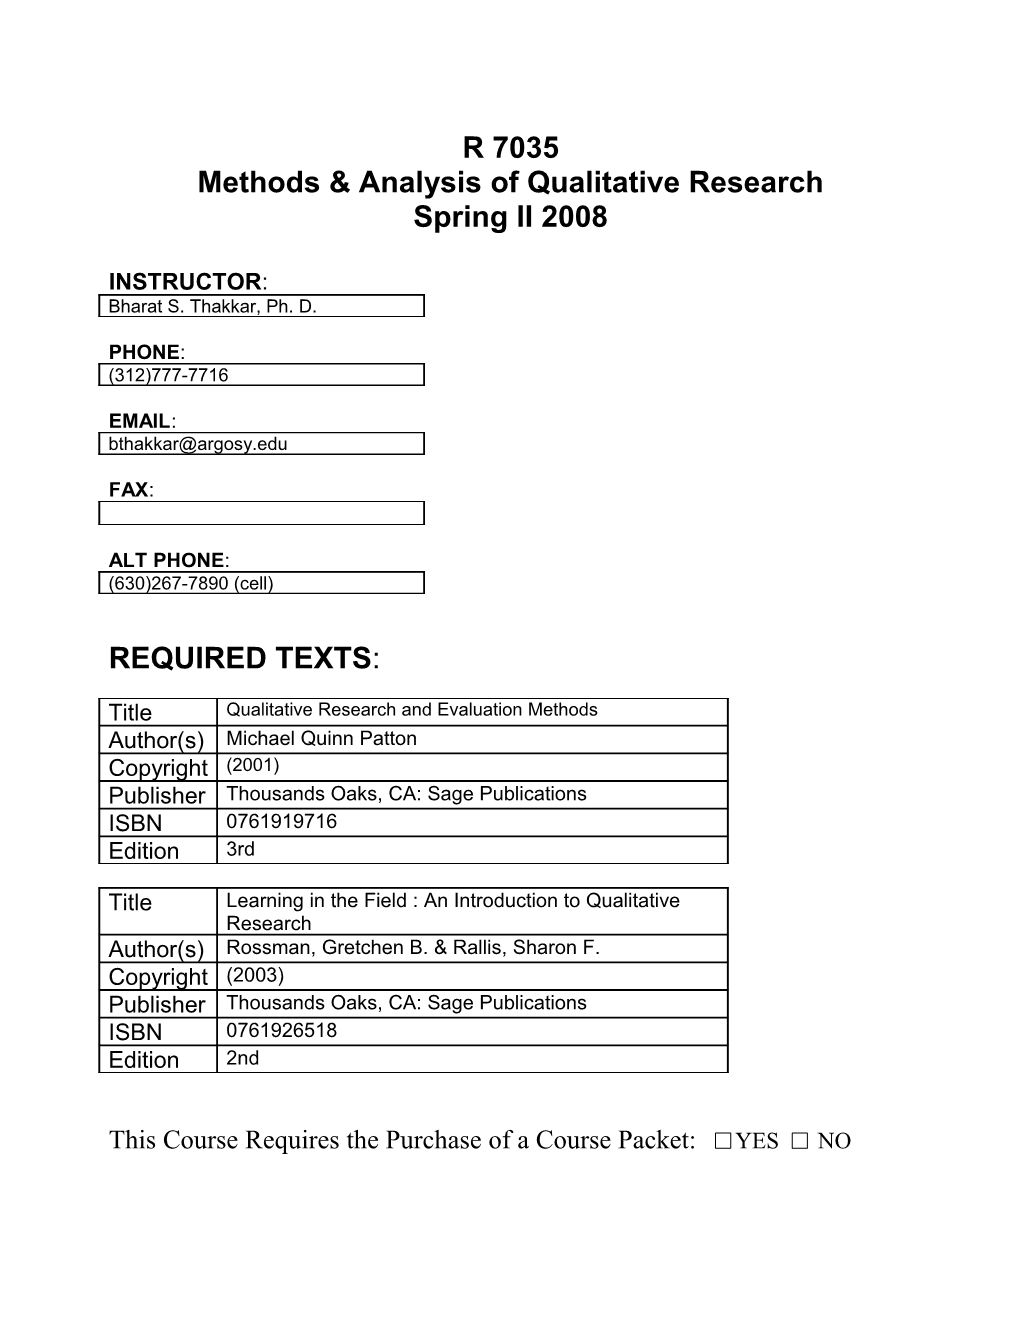 Methods & Analysis of Qualitative Research